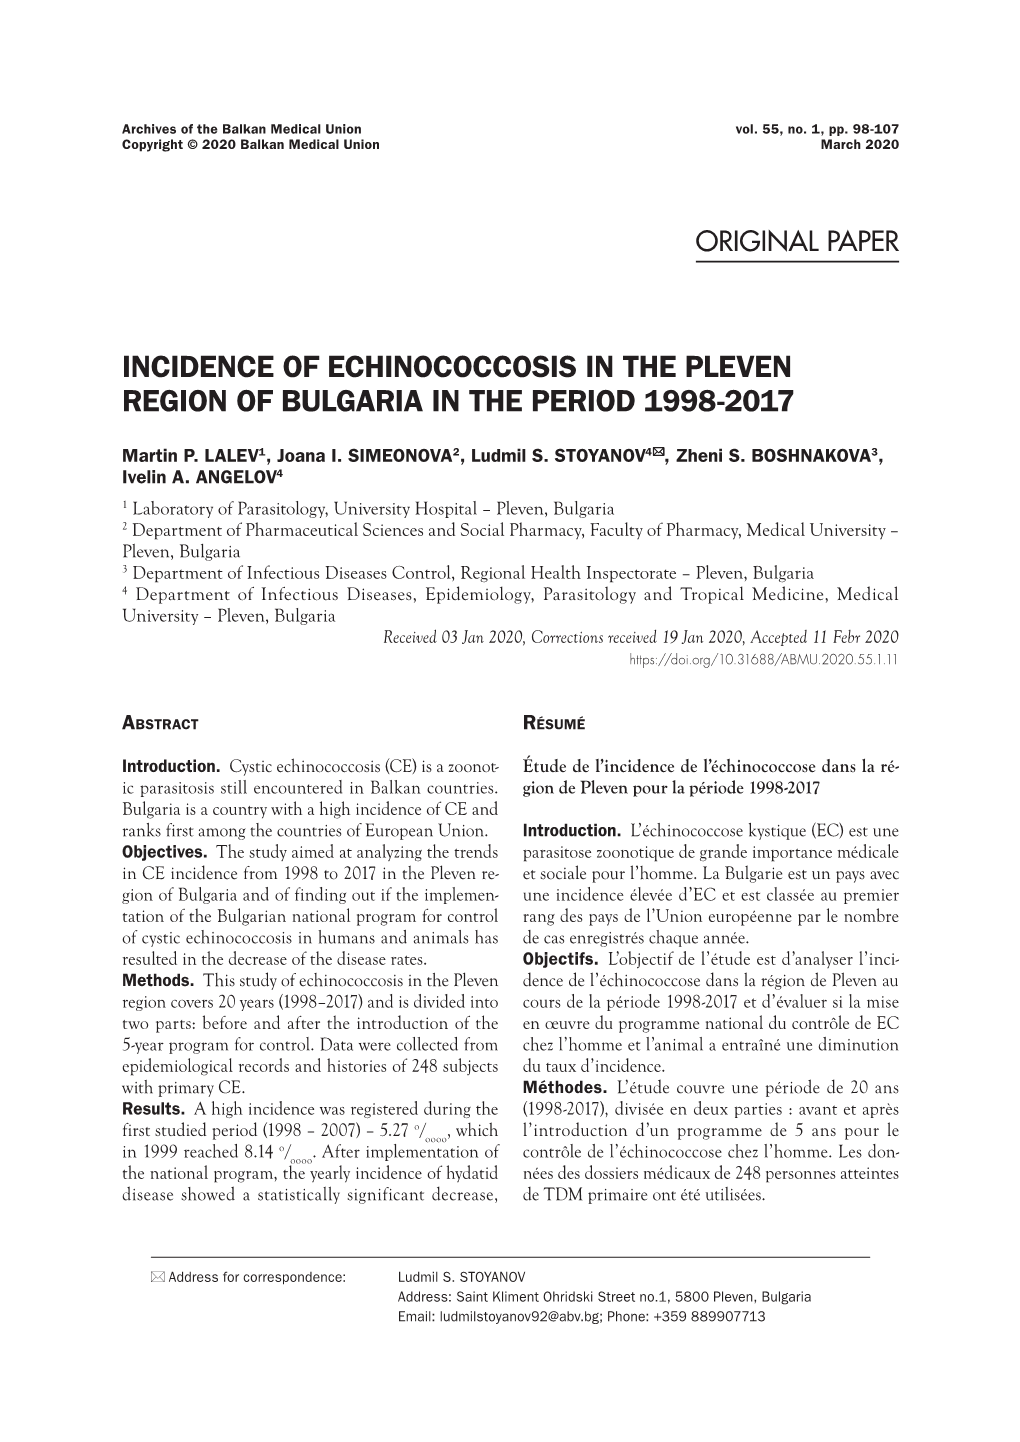 Incidence of Echinococcosis in the Pleven Region of Bulgaria in the Period 1998-2017